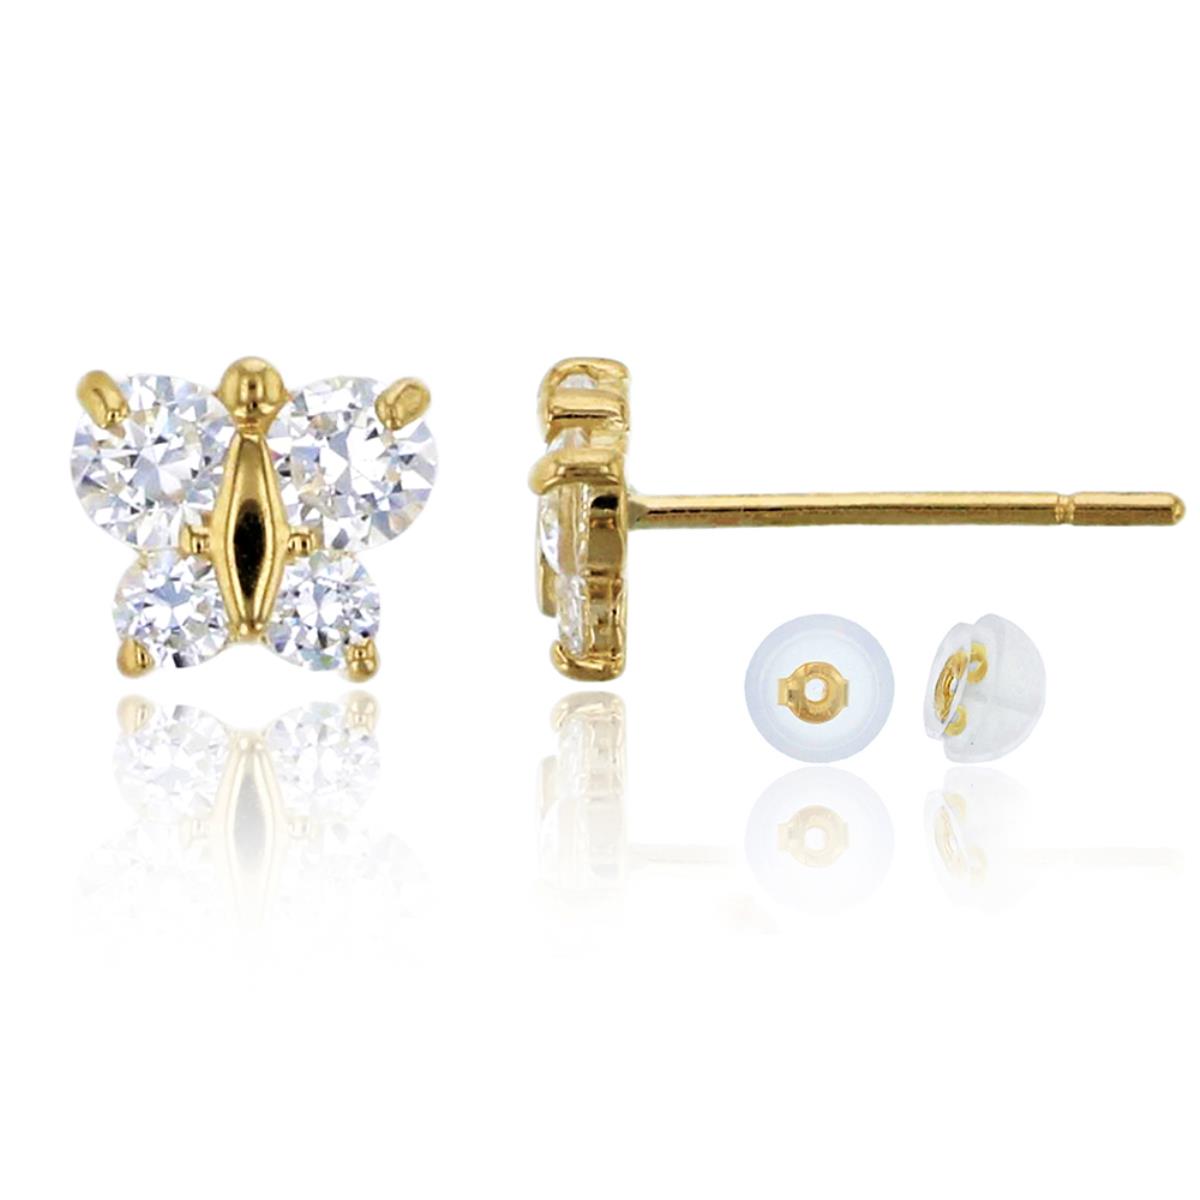 10K Yellow Gold Round Cut Butterfly CZ Stud Earrings with Bubble Silicone Backs